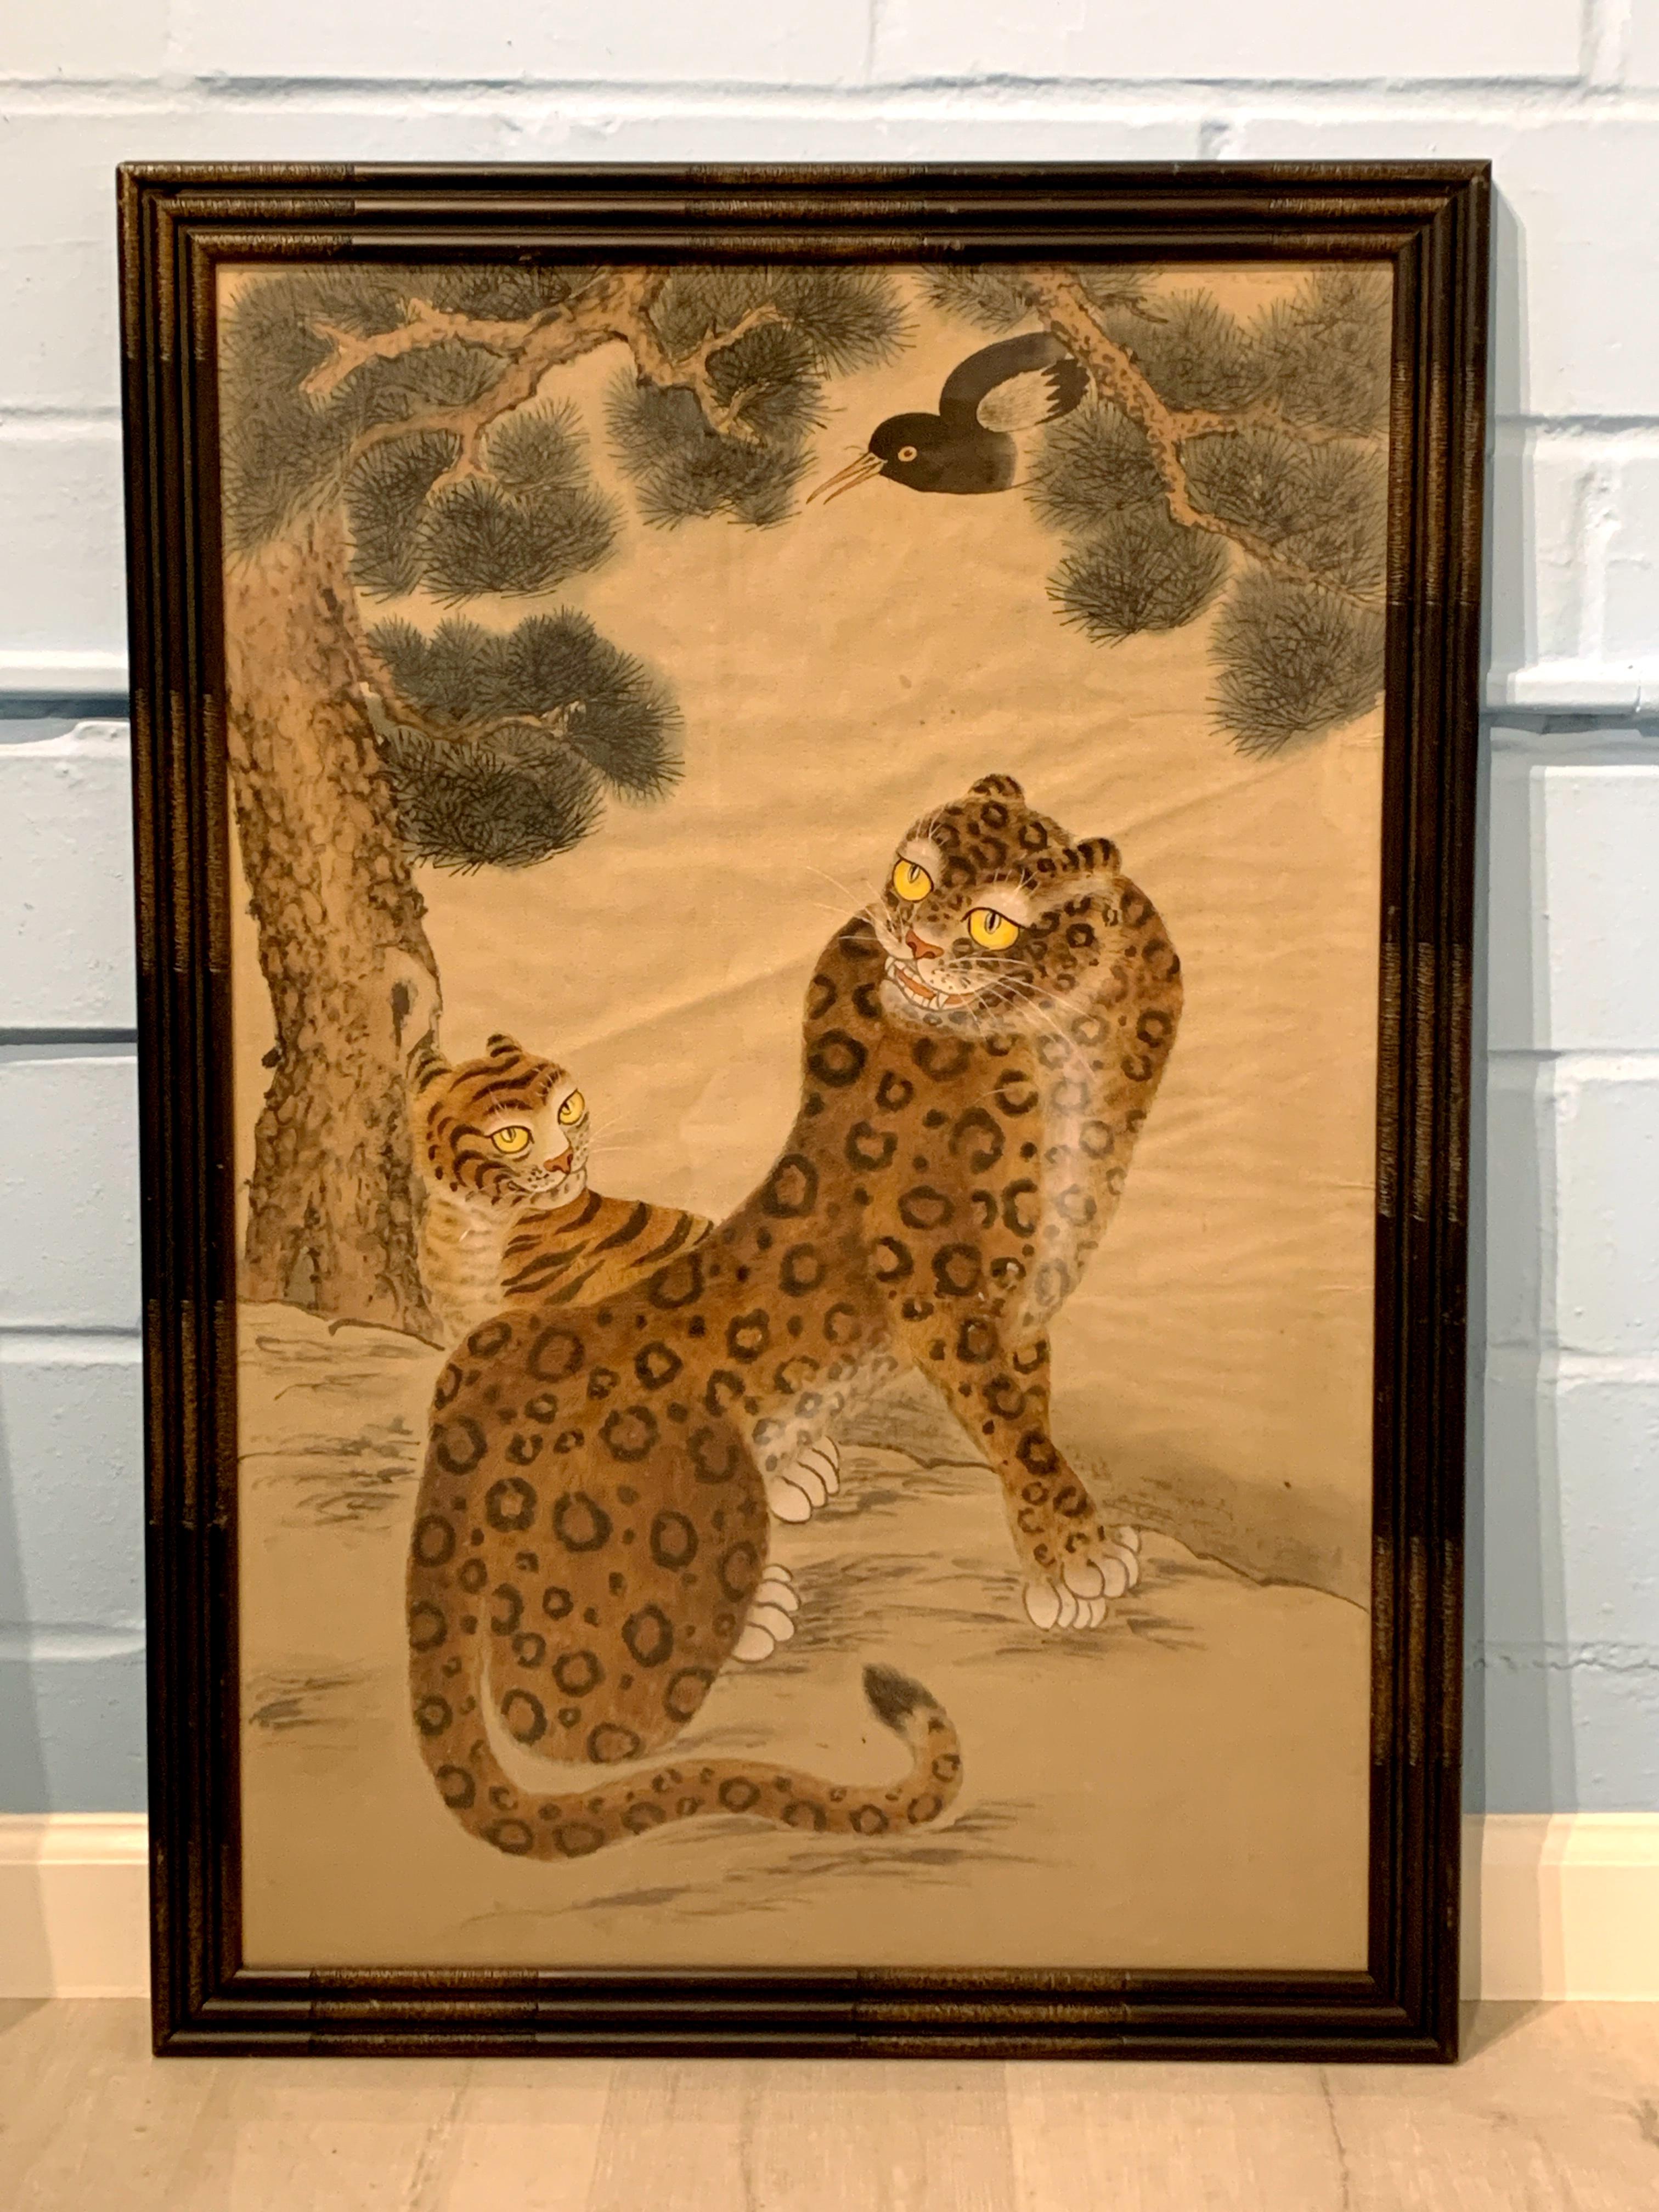 A wonderfully charming Korean Minhwa Jakhodo painting on silk of a spotted tiger with her cub under a pine tree, a magpie in the branches above them, Joseon Dynasty, late 19th century. 

The traditional Korean folk painting (minhwa) of ink and